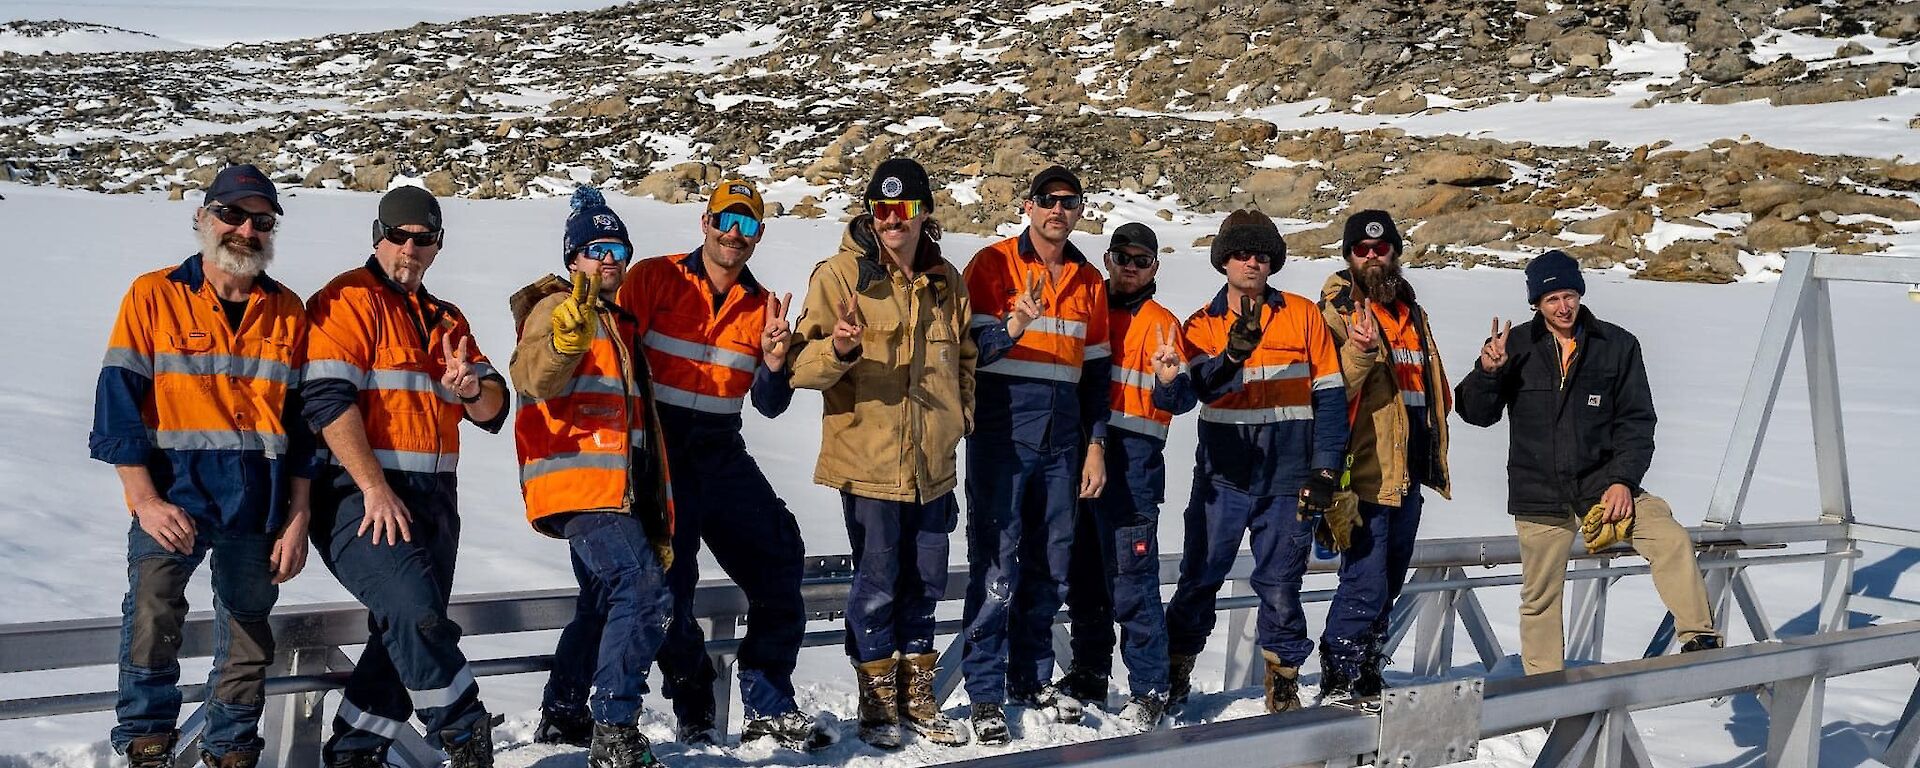 Ten men in high-vis work shirts or jackets, sunglasses and beanies, standing in a row, making 'peace' signs with their fingers. The ground is covered with snow, with a low, rocky hill rising behind them